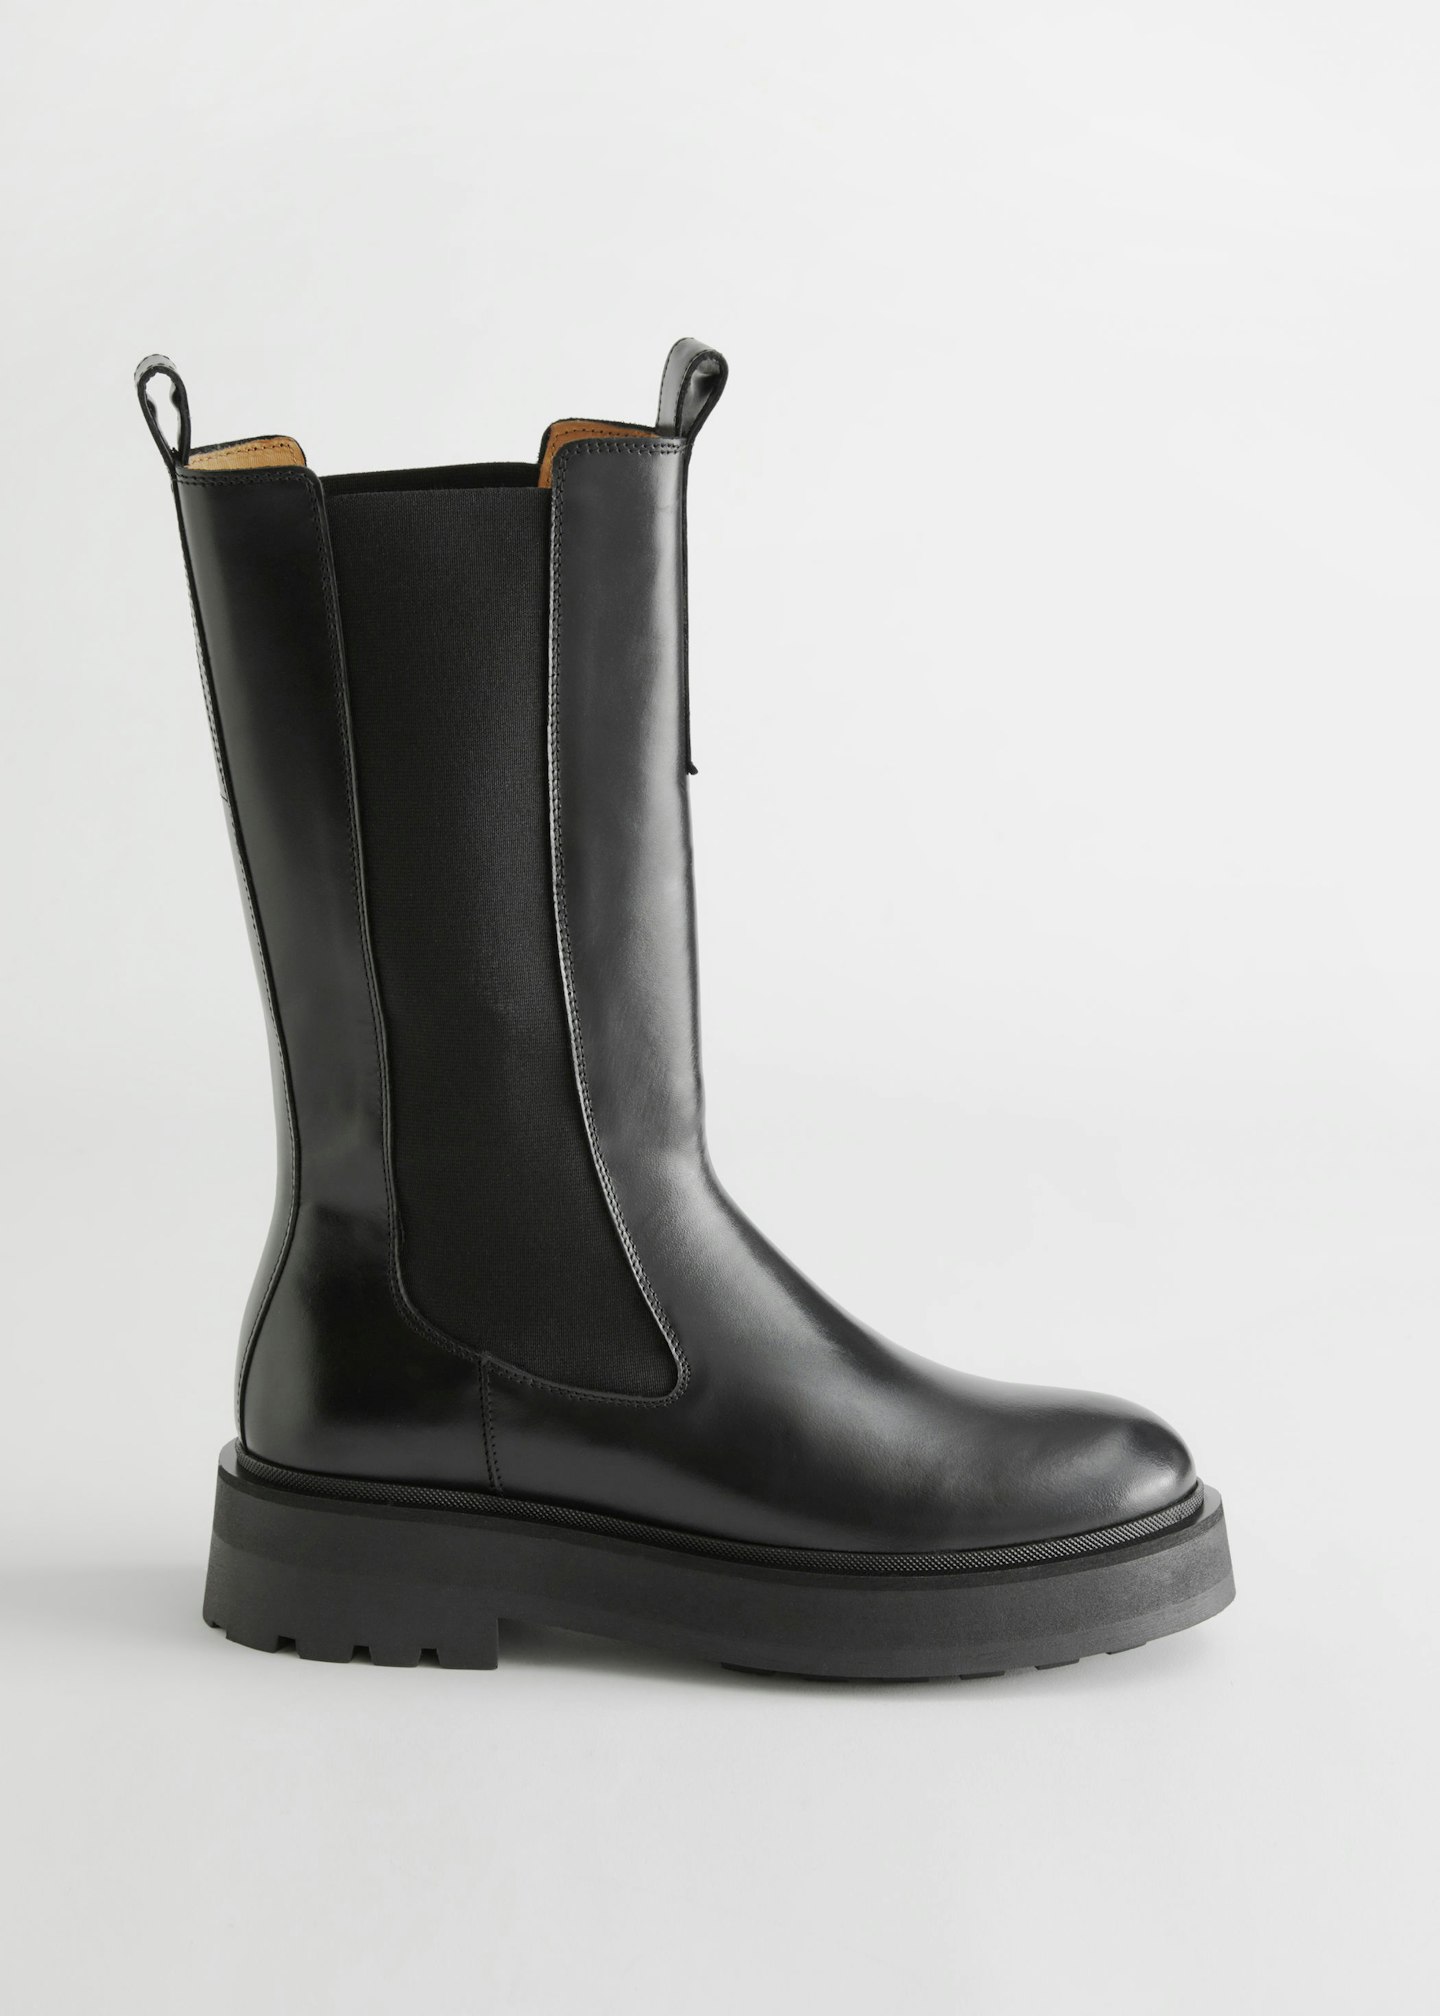 & Other Stories, Tall Leather Chelsea Boots, £175